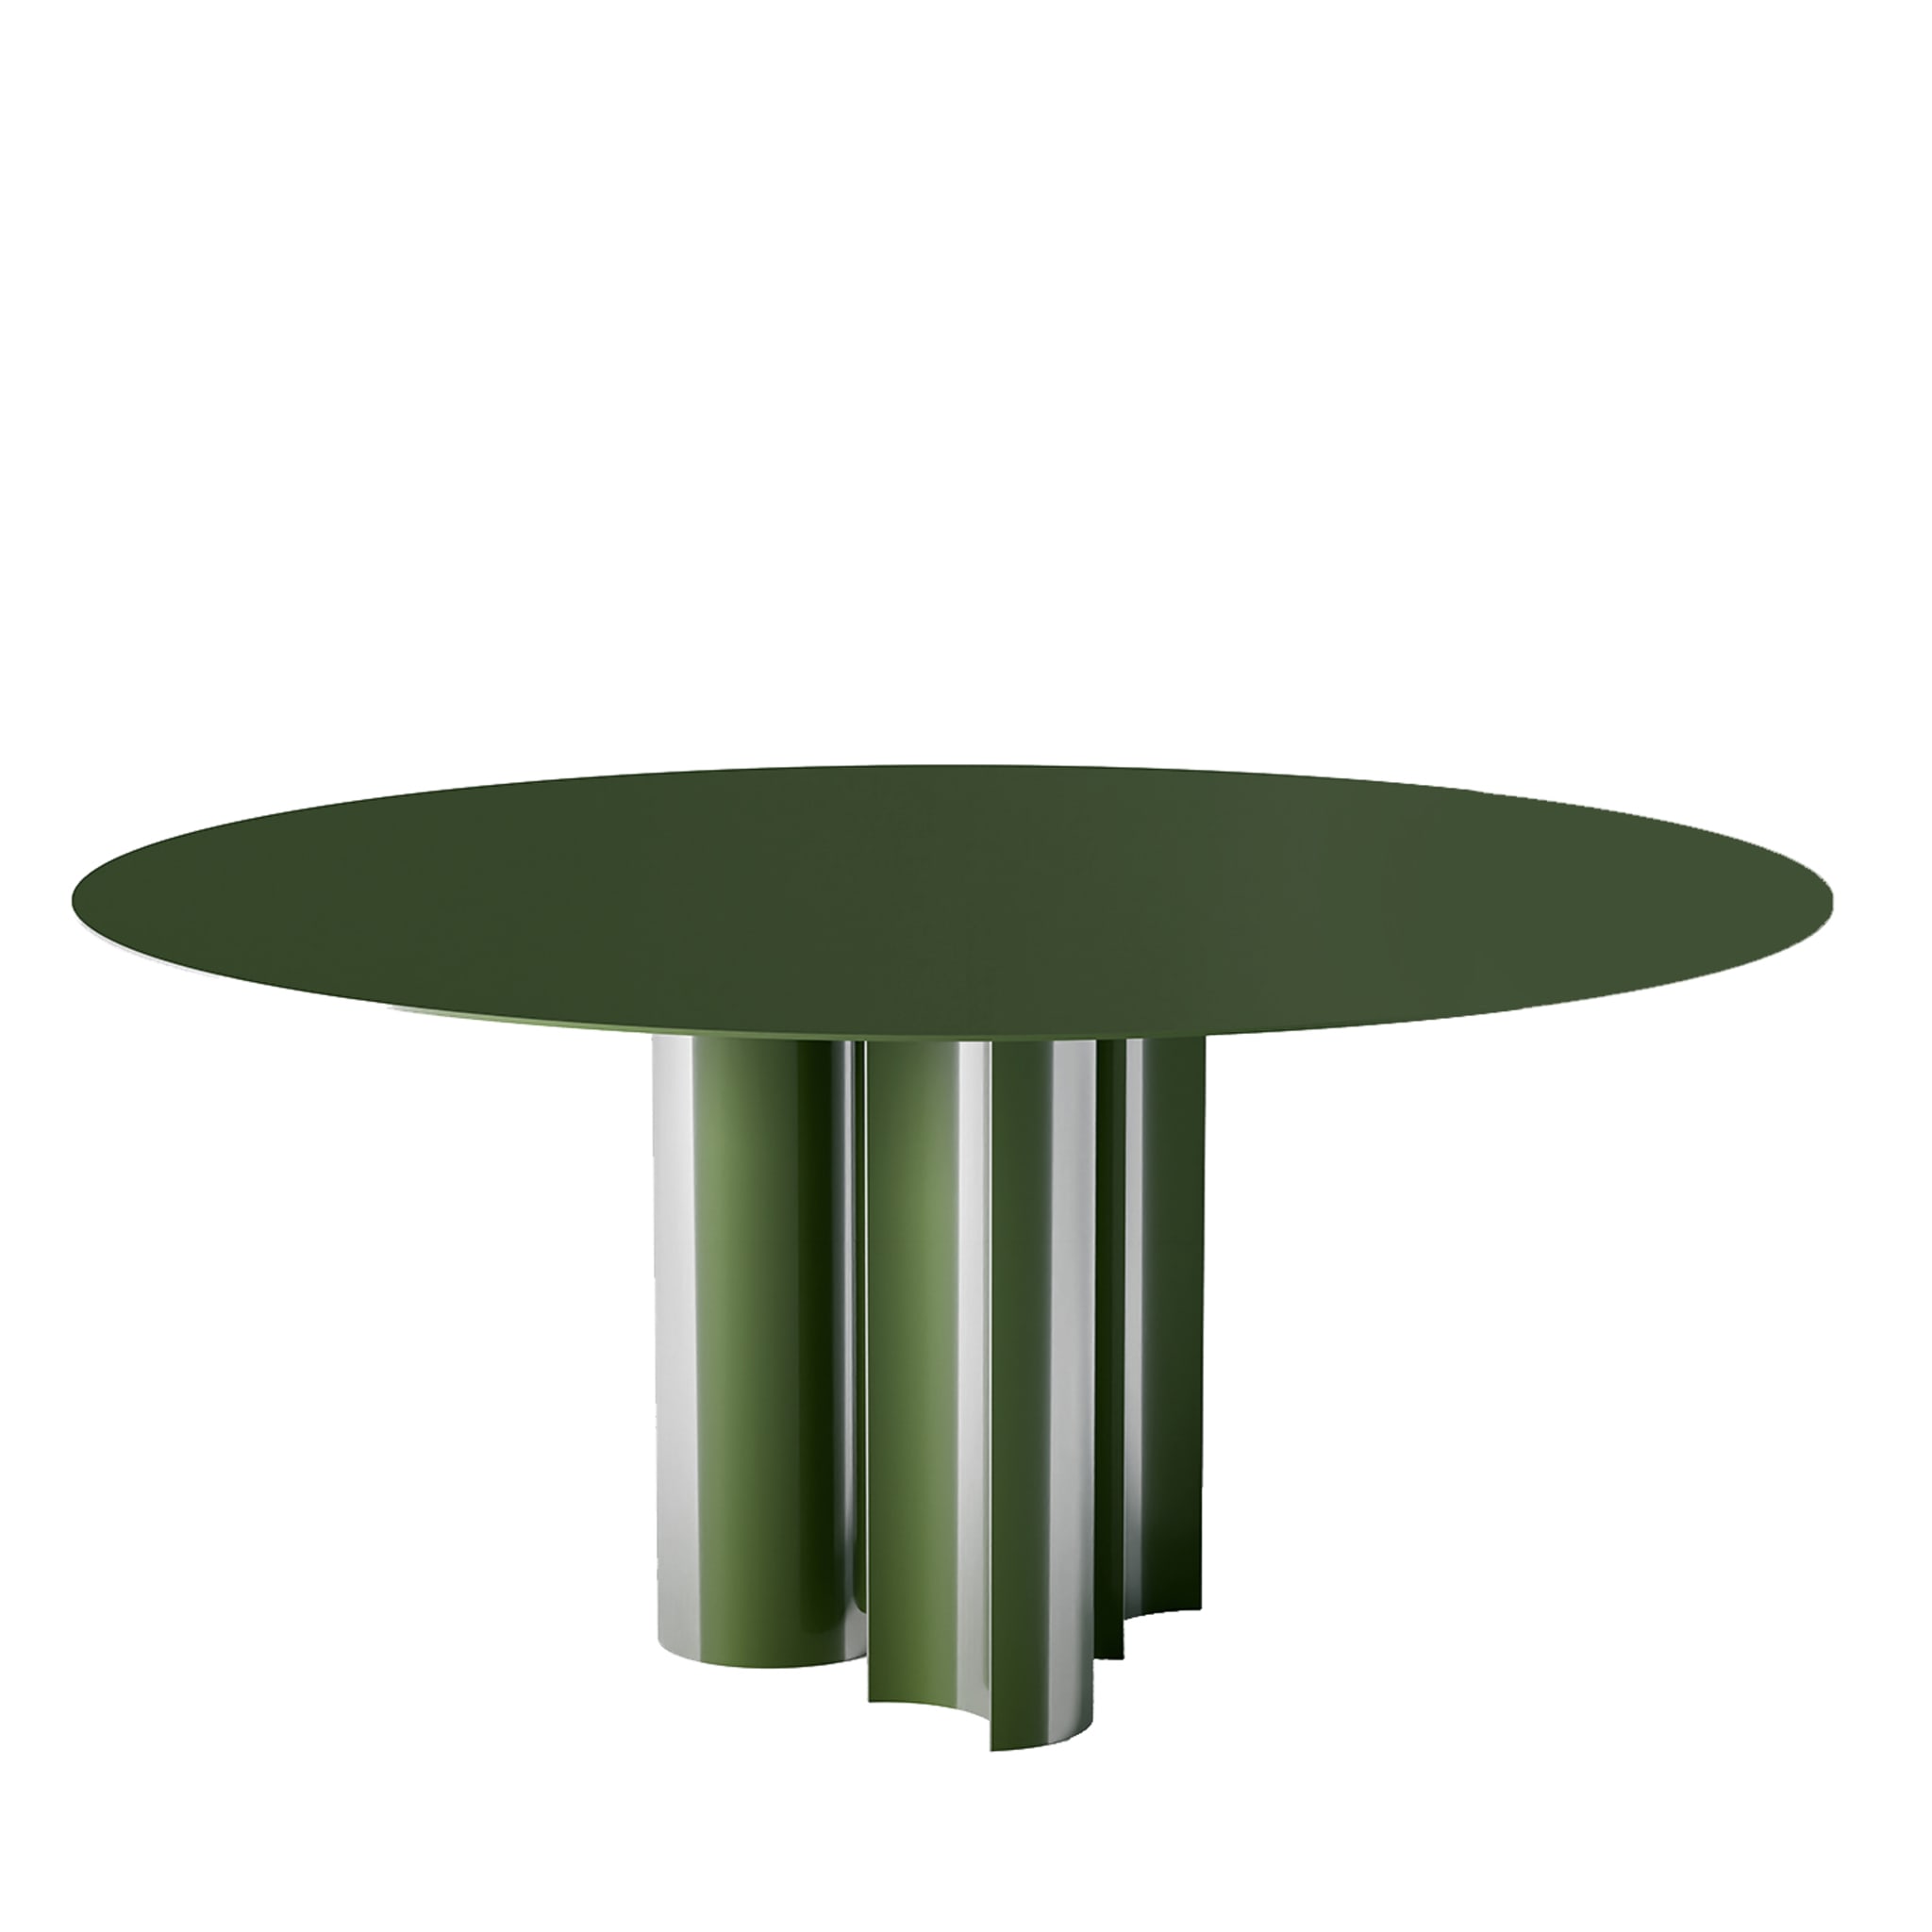 Moon Phase Round Table By Filippo Dell'Orto - Main view